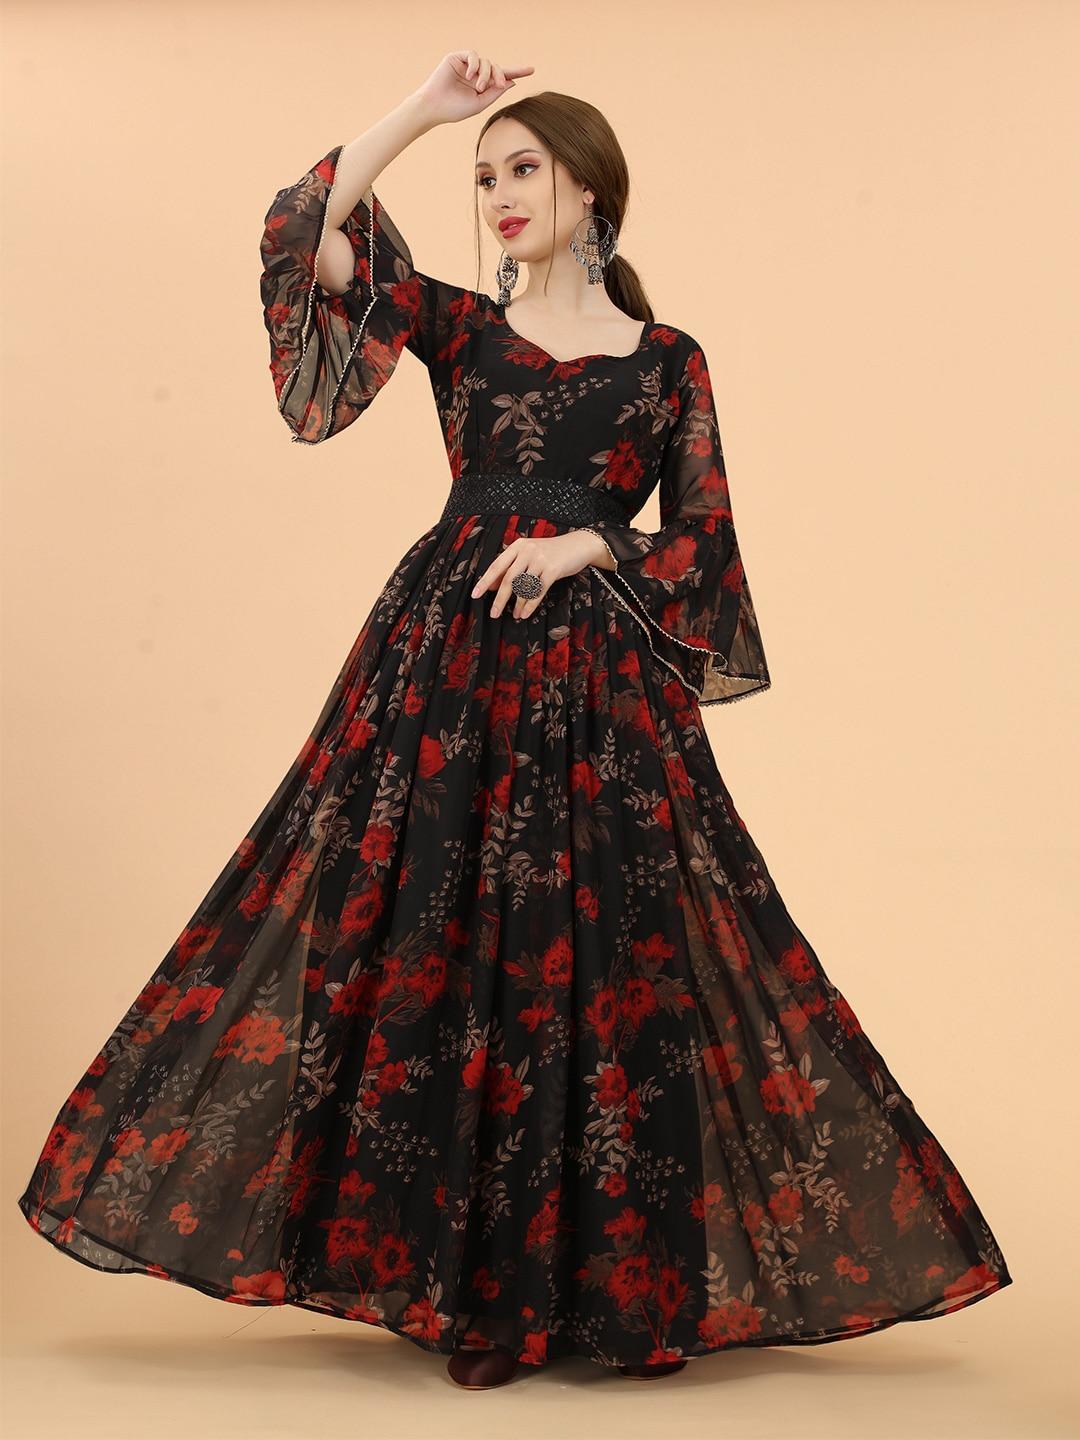 ASPORA Women Black & Red Floral Fit And Flare Maxi Dress